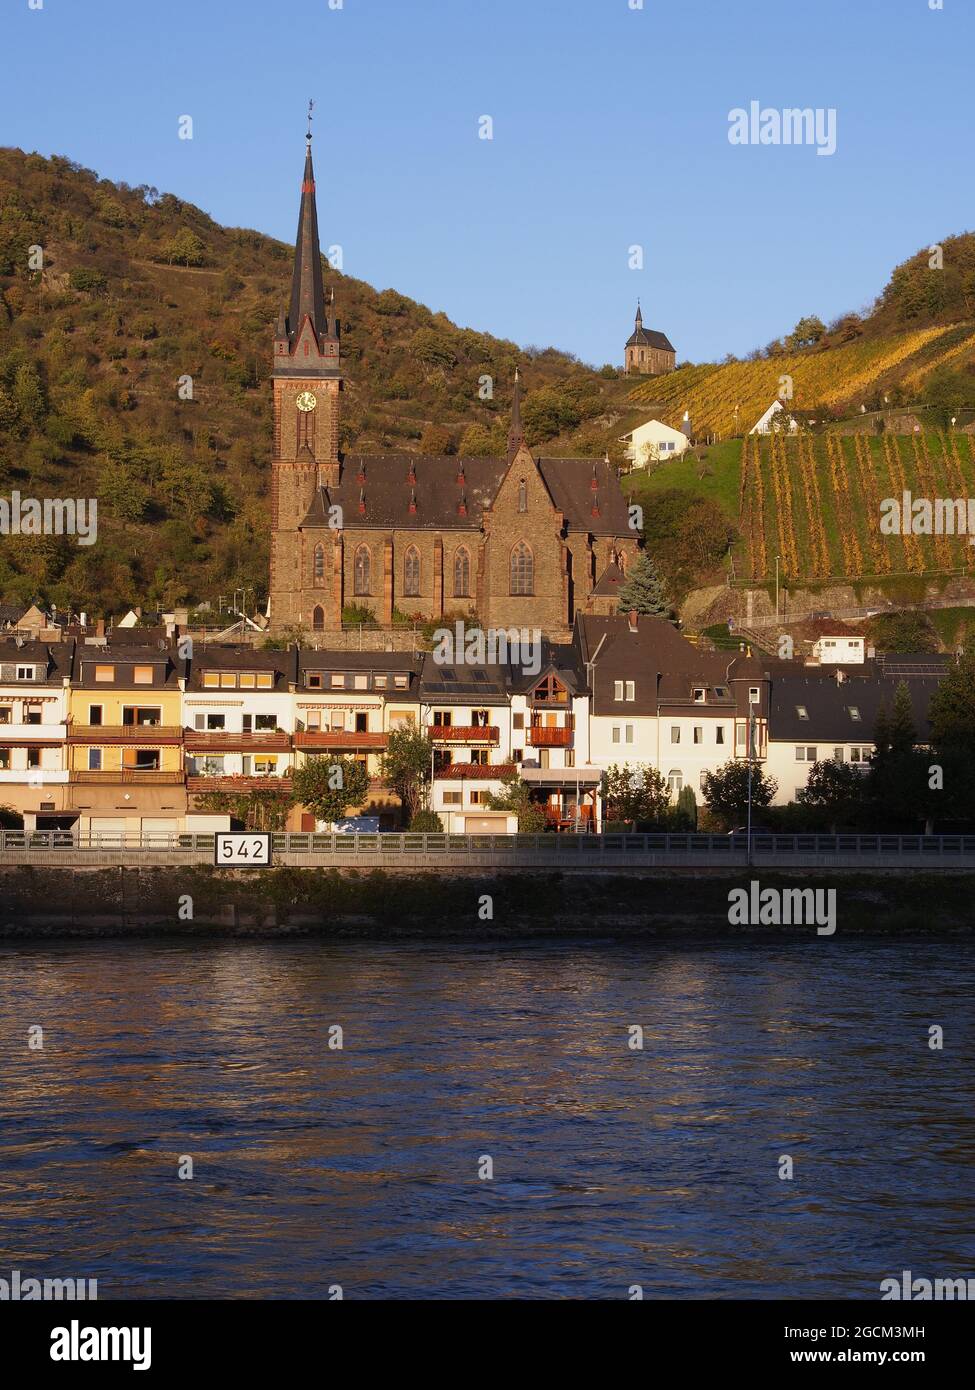 Rhineland. Two German churches on the River Rhine. One in the town Bacharach on the River Bank the other on the hillside overlooking the town. Stock Photo